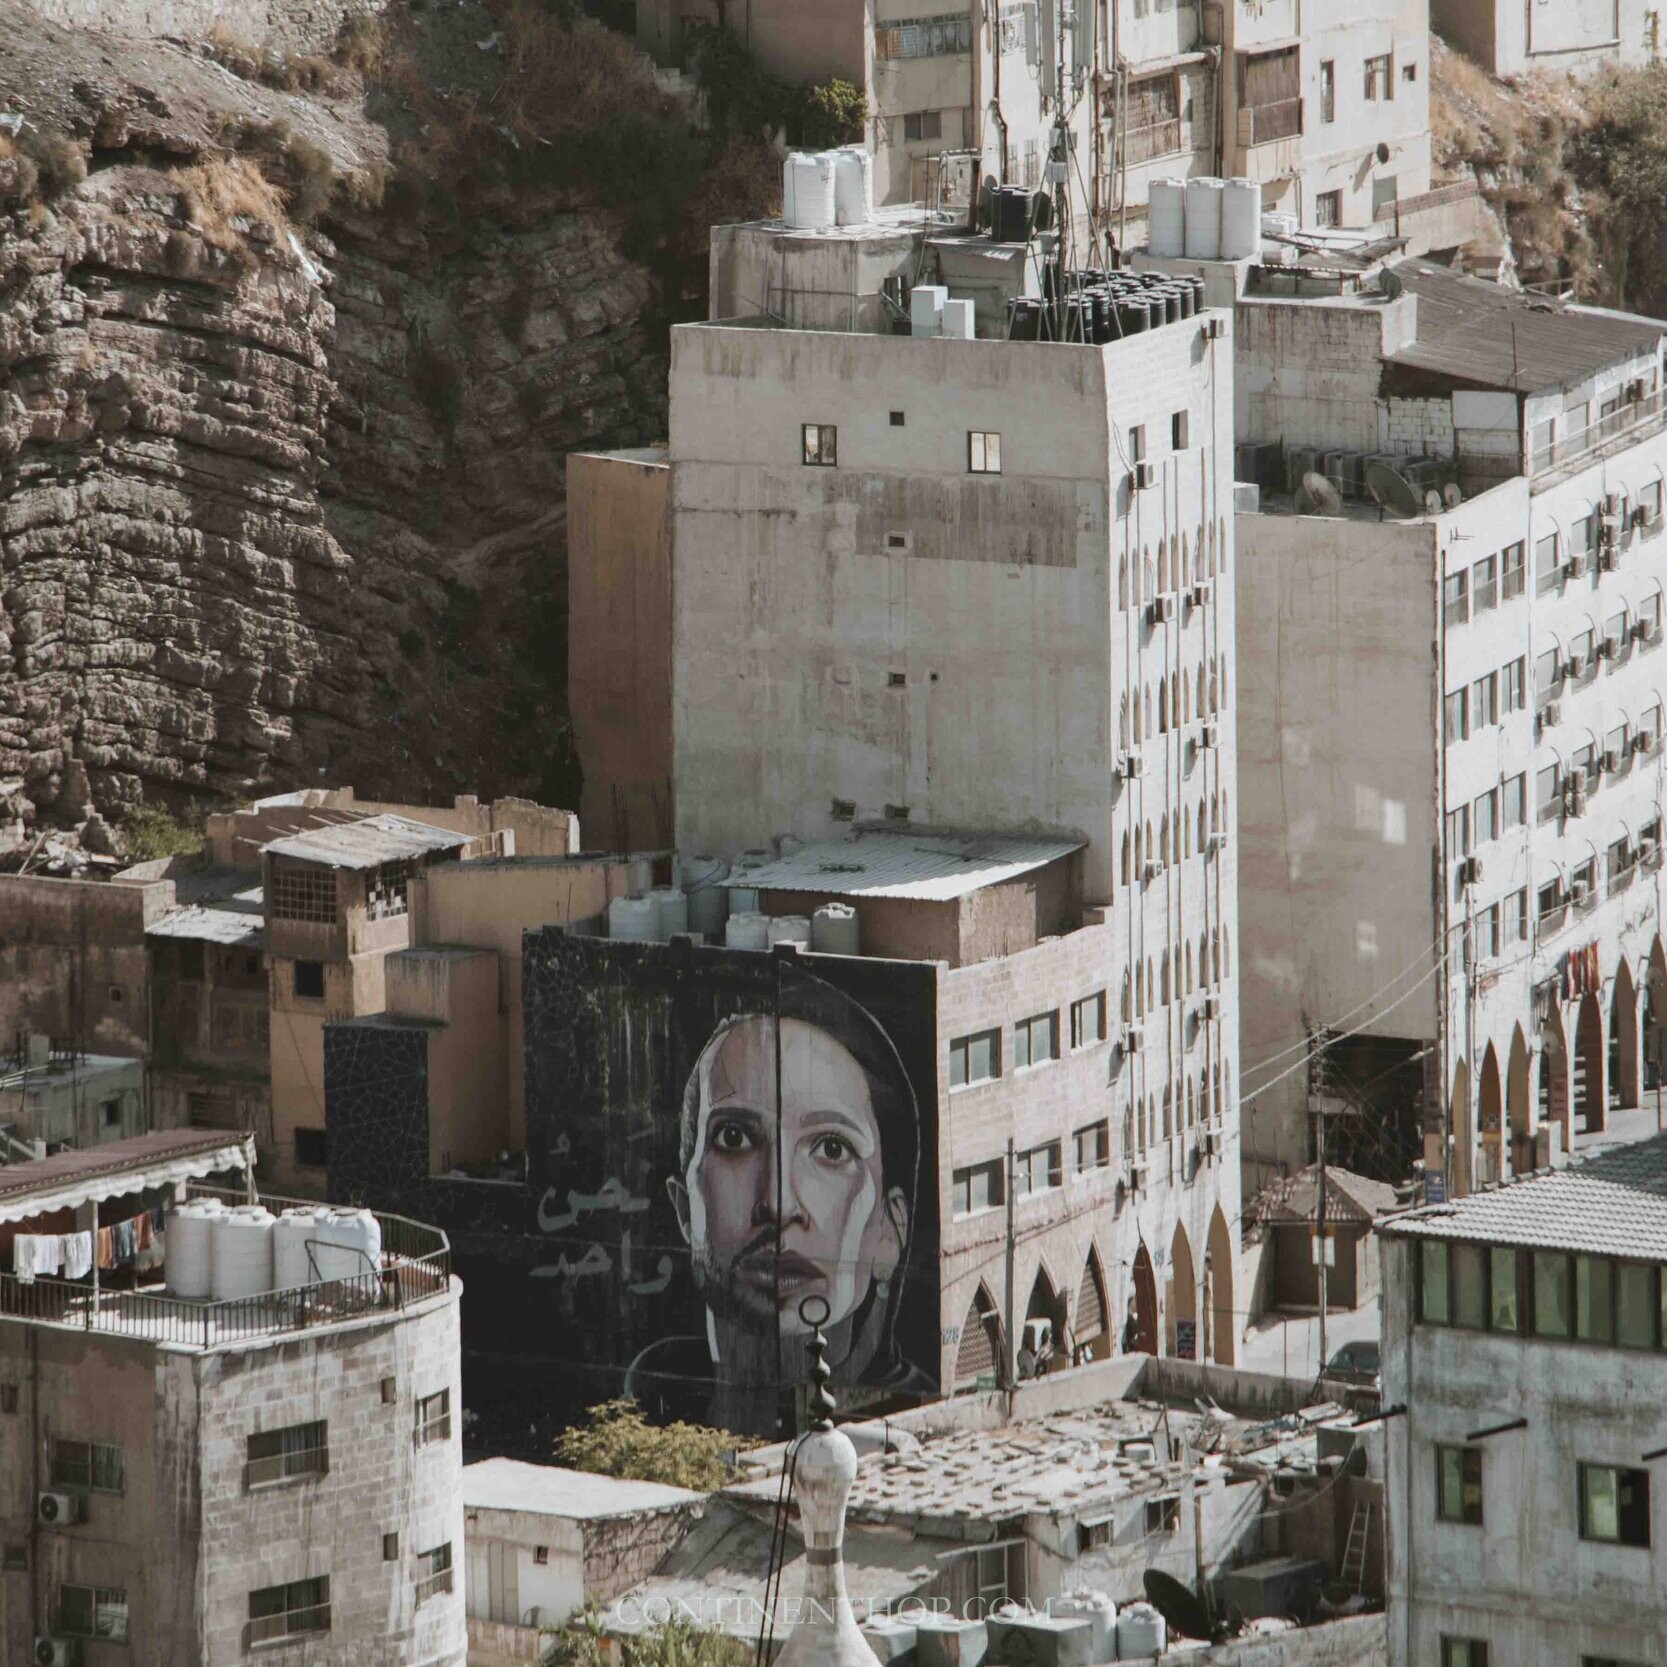 Image of a mural on a building in Downtown Jordan